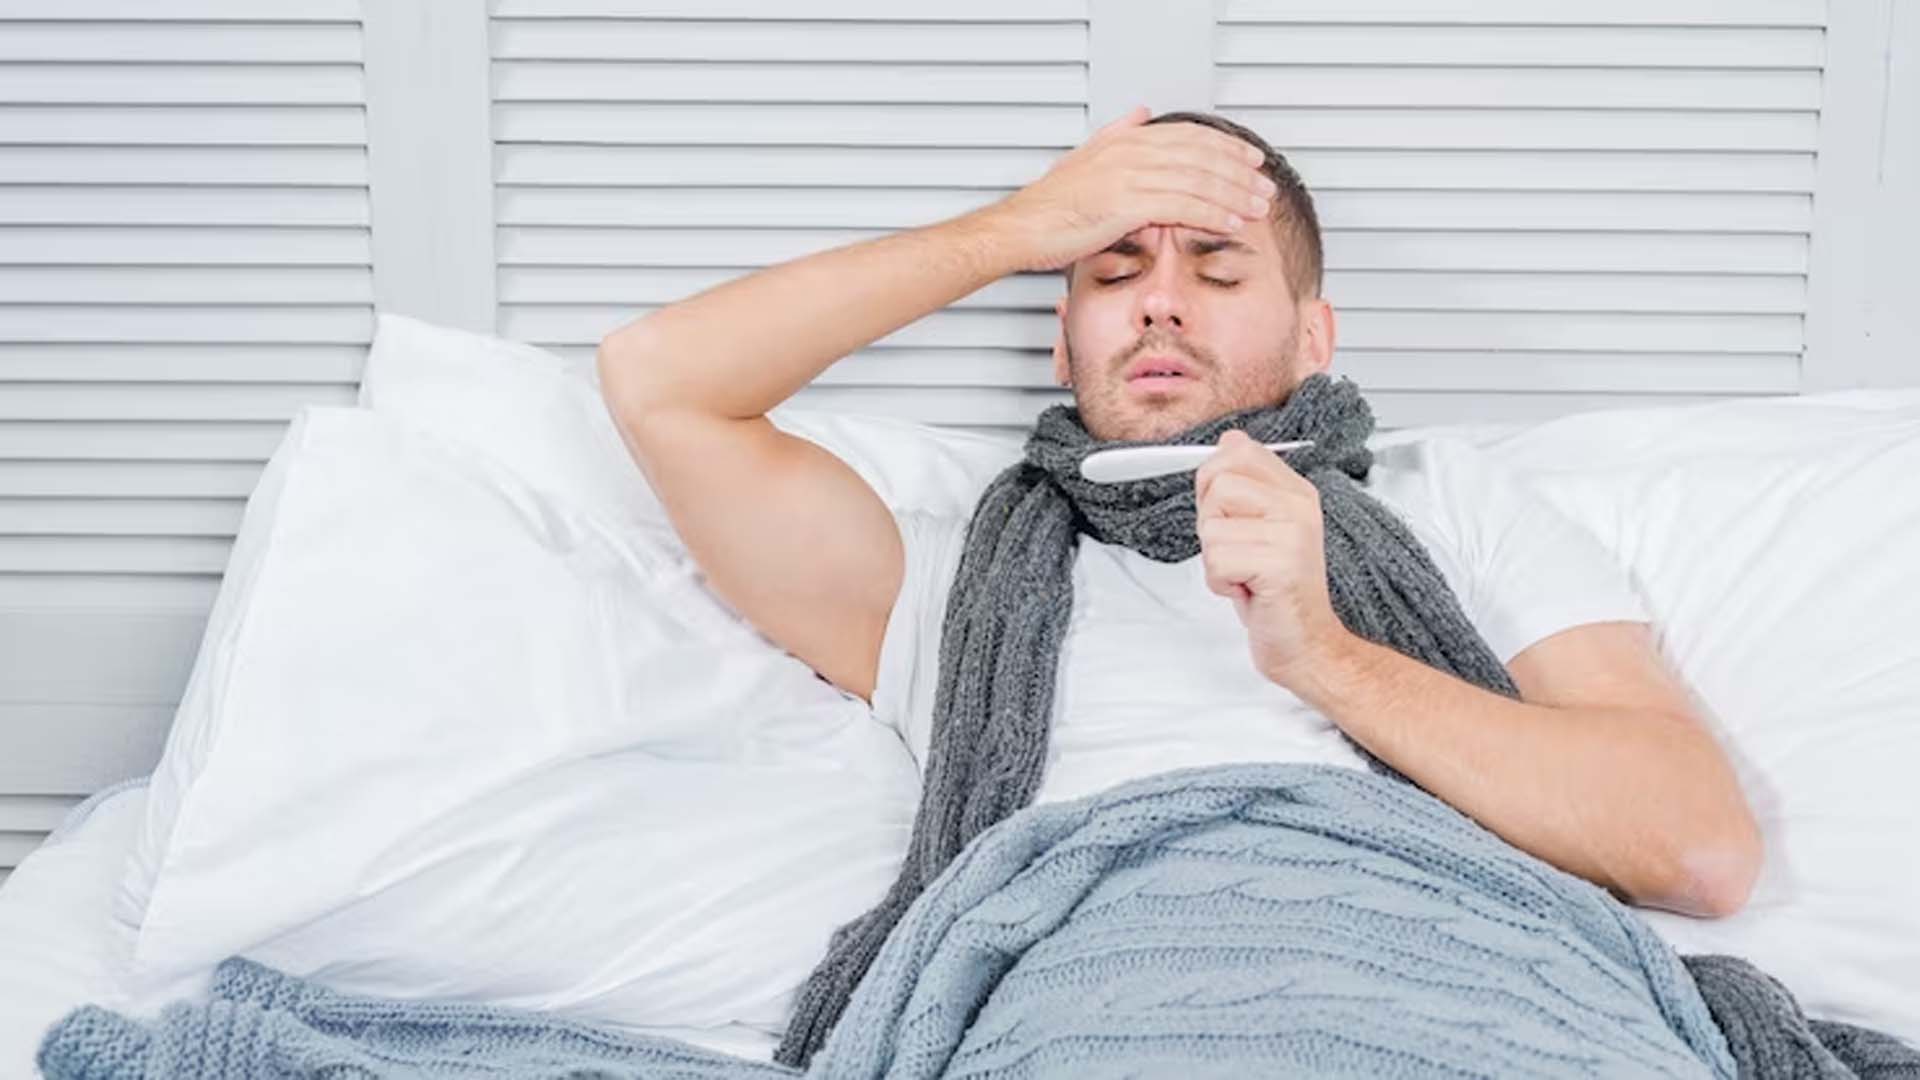 Man suffering from Fever